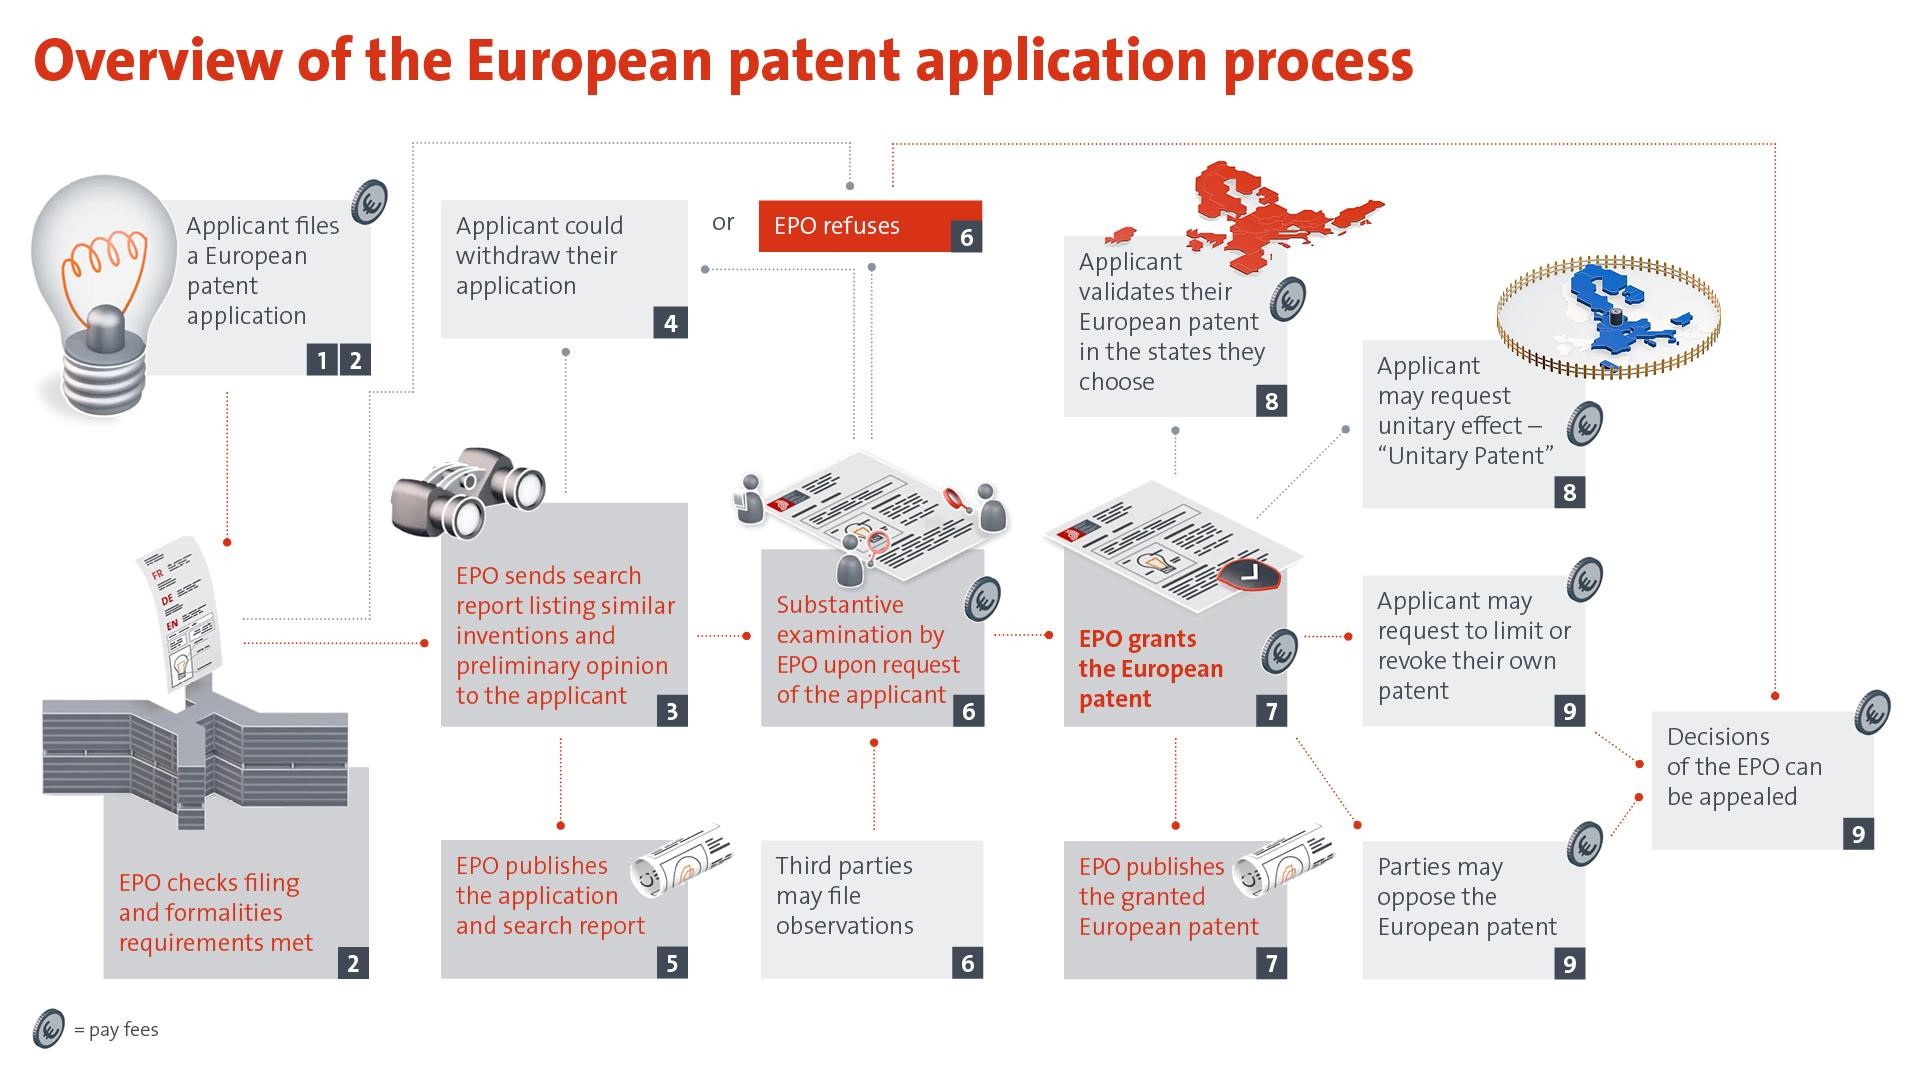 novelty-search-european-patent-application-process